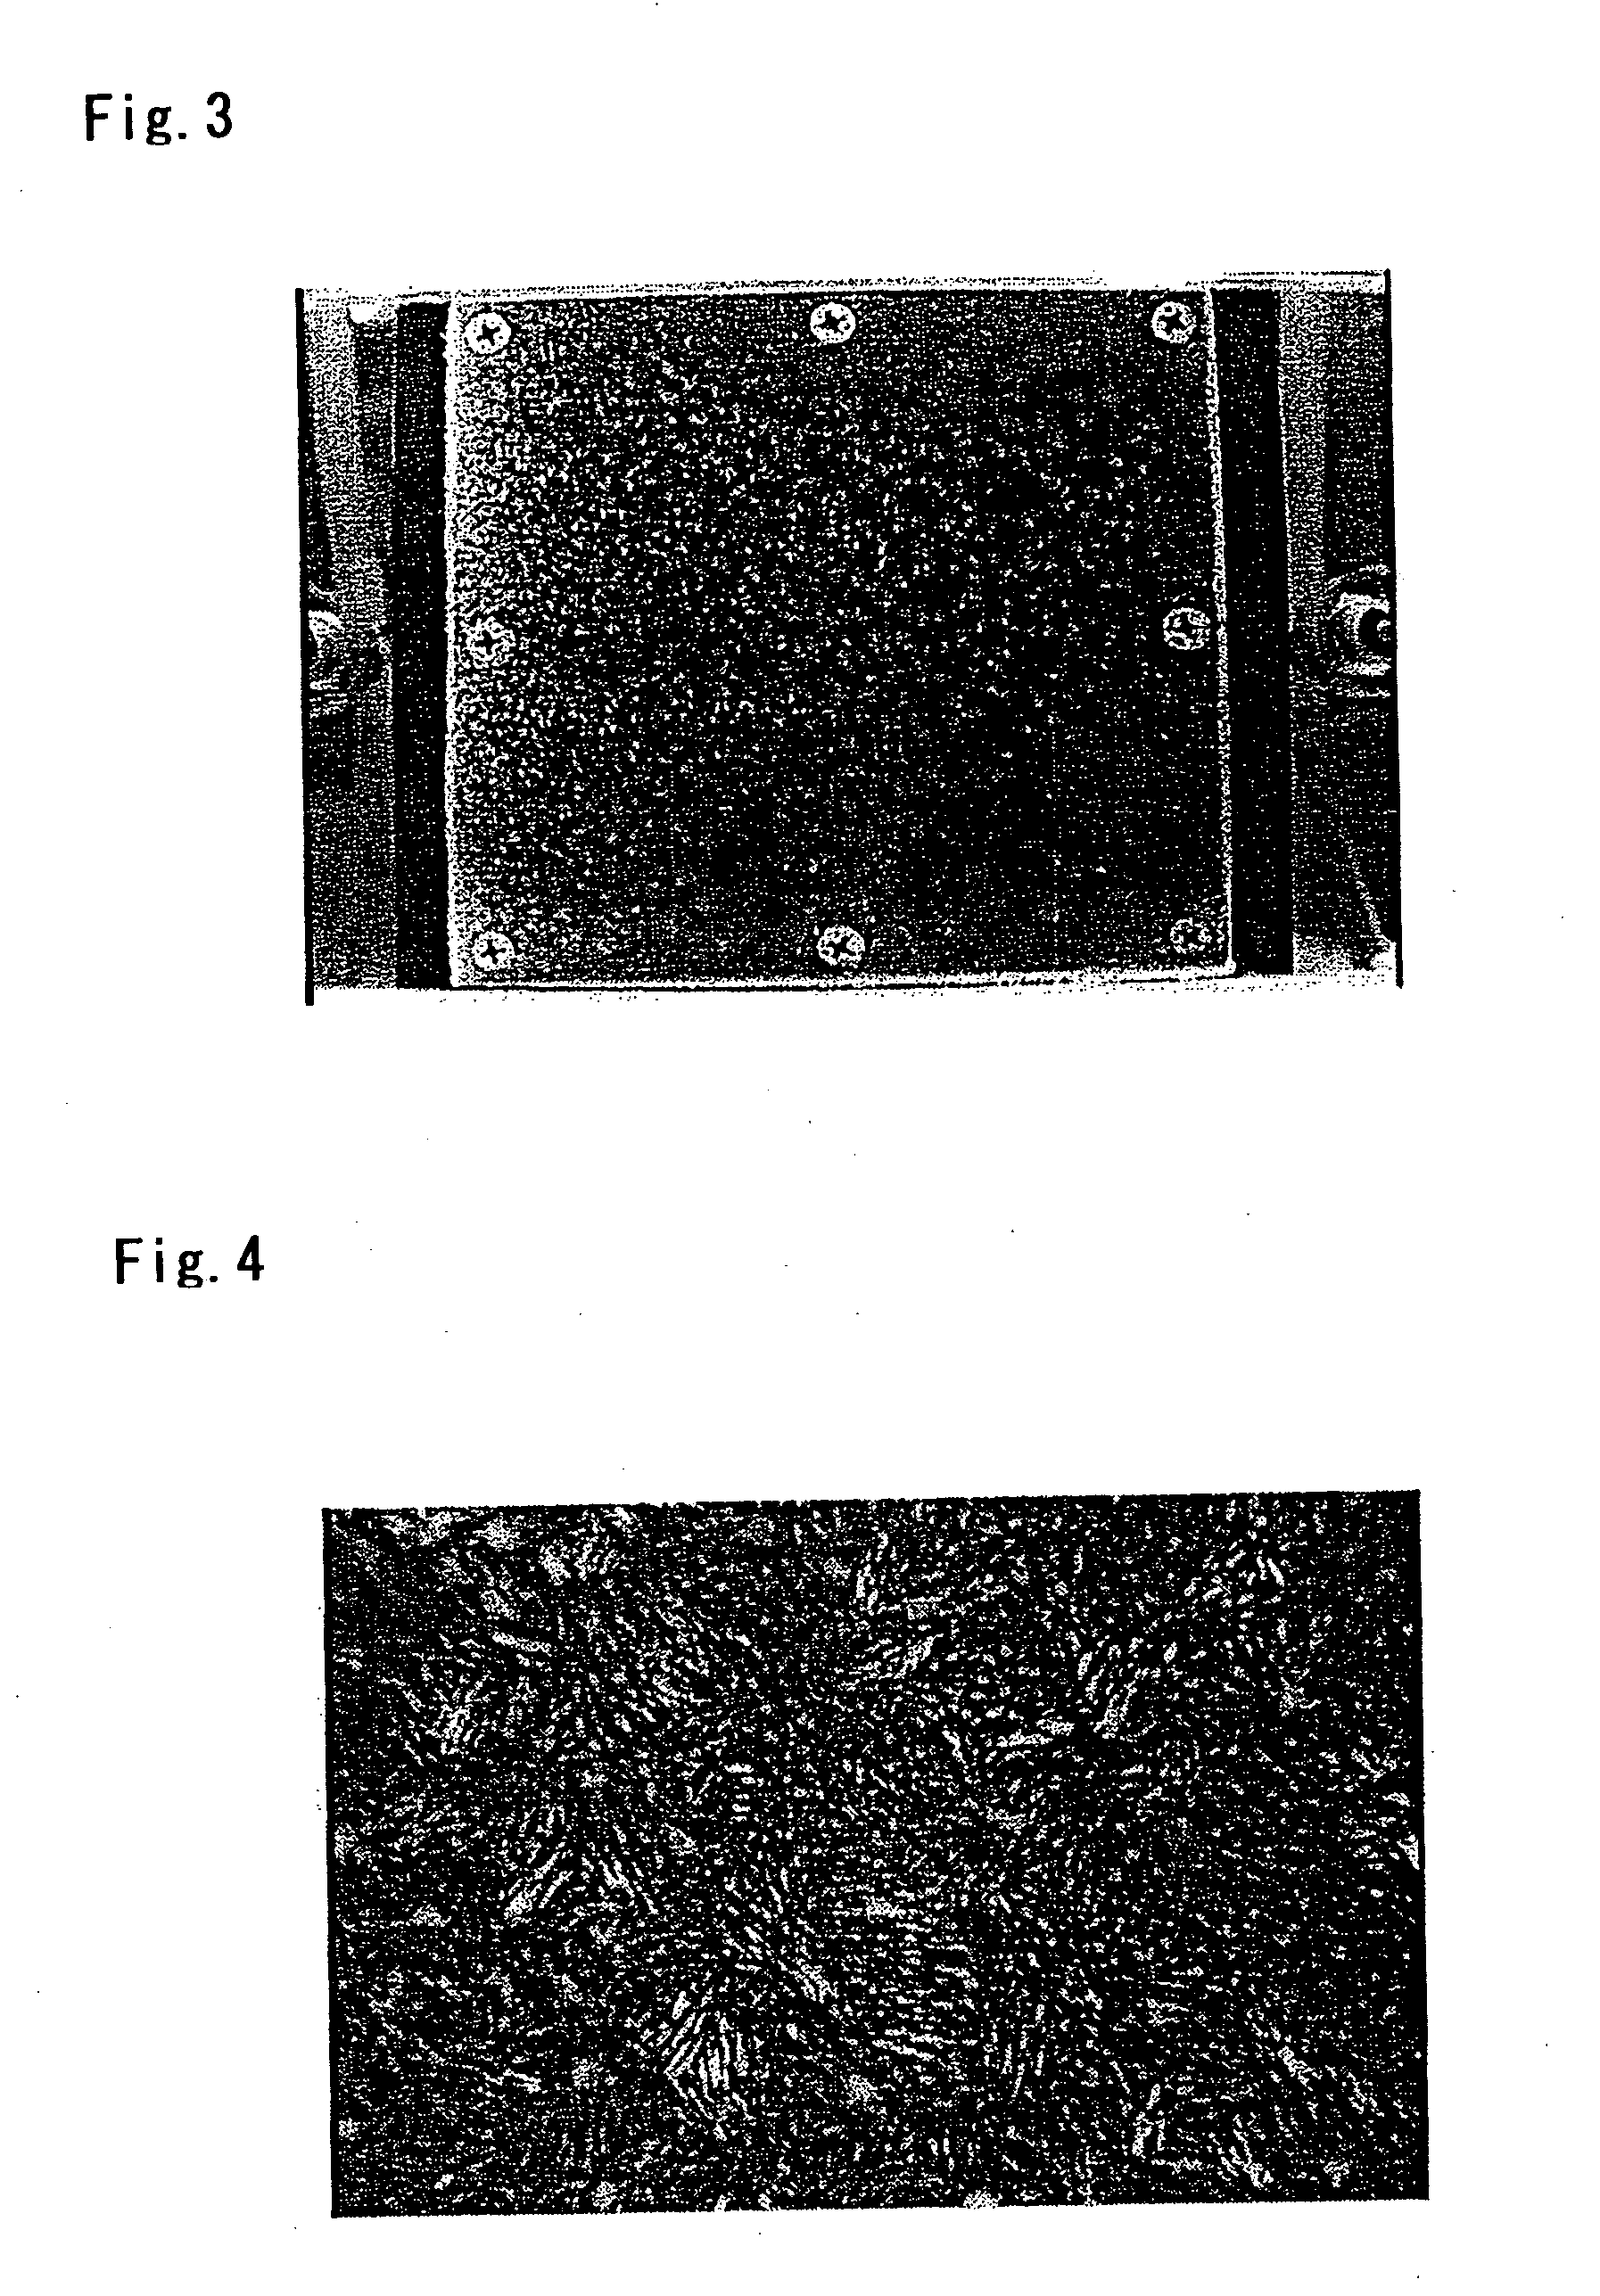 Heat exchanger for air and freezer device